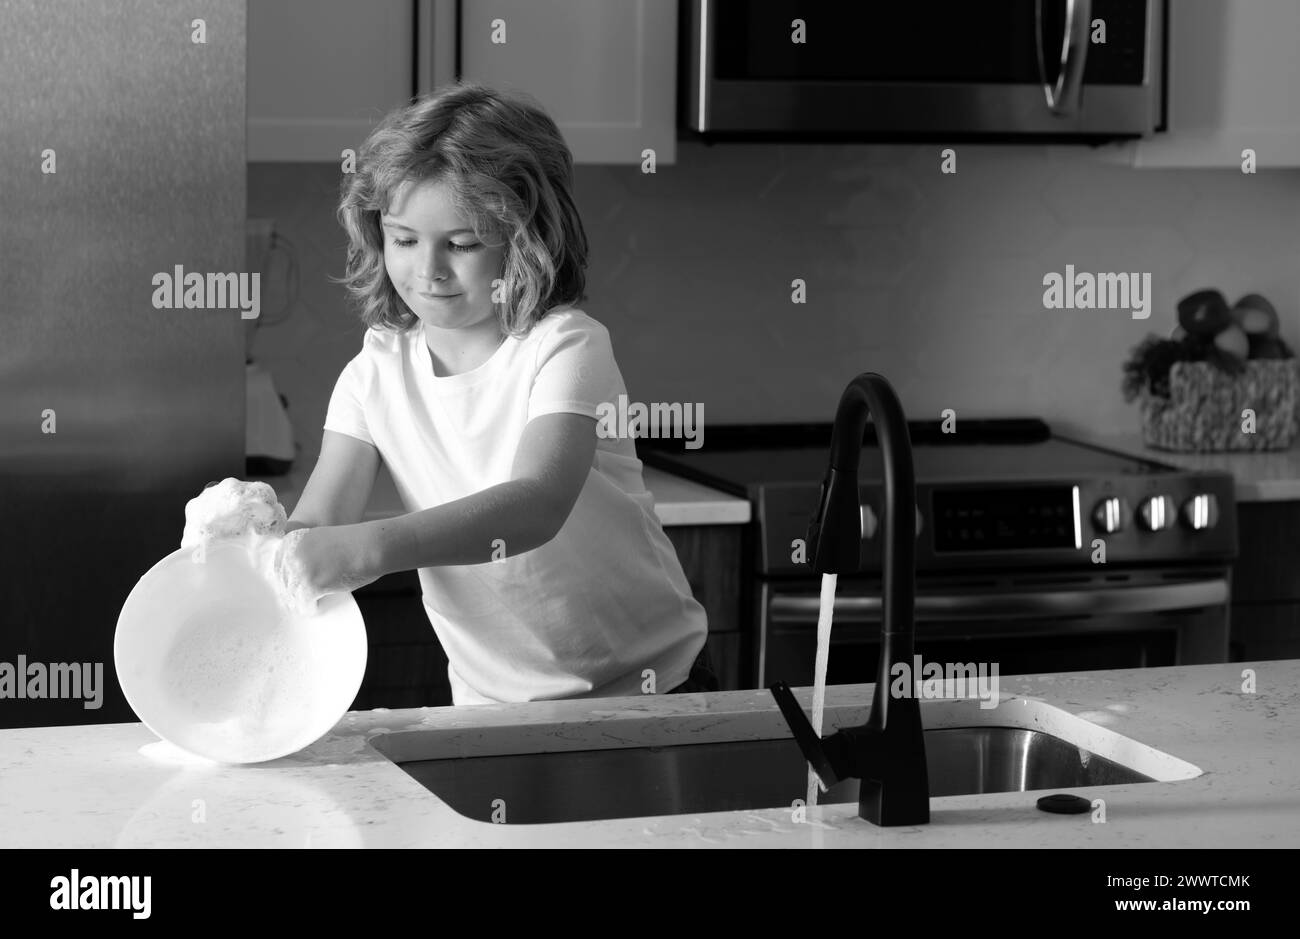 Child housekeeper washing the dishes on soapy water. Cute Funny boy washing dishes in kitchen. American kid learning domestic chores at home. Cleaning Stock Photo